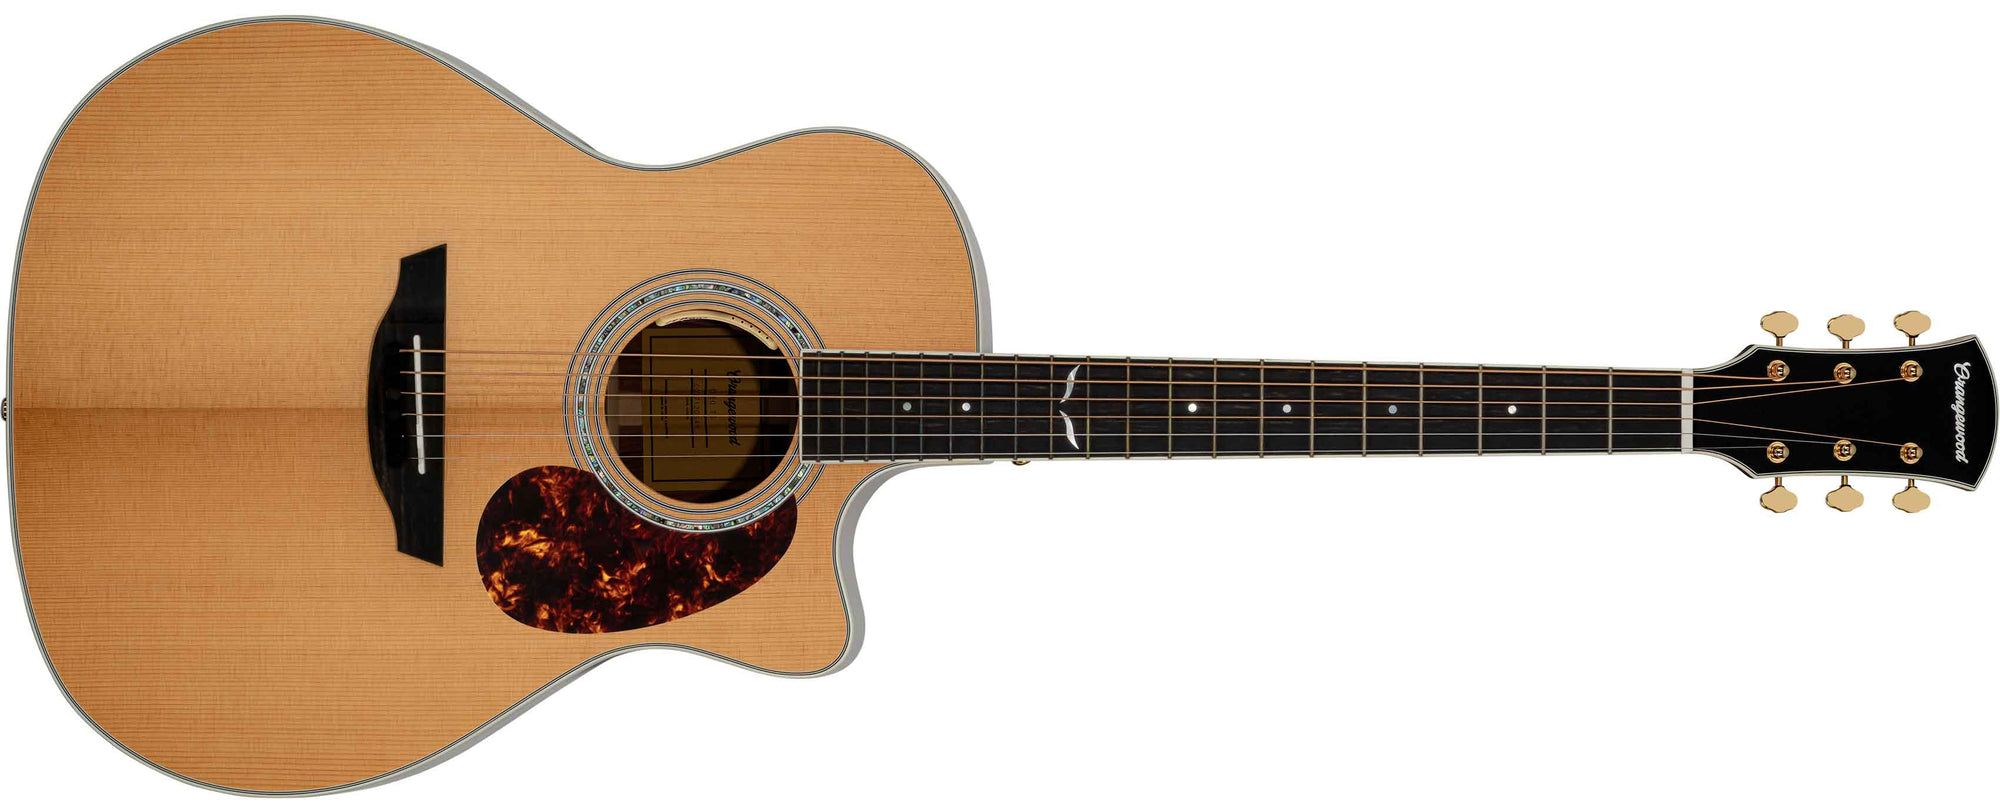 Torrefied spruce grand auditorium cutaway acoustic electric guitar with ebony fretboard, mother of pearl fretboard inlays, abalone rosette, and gold hardware